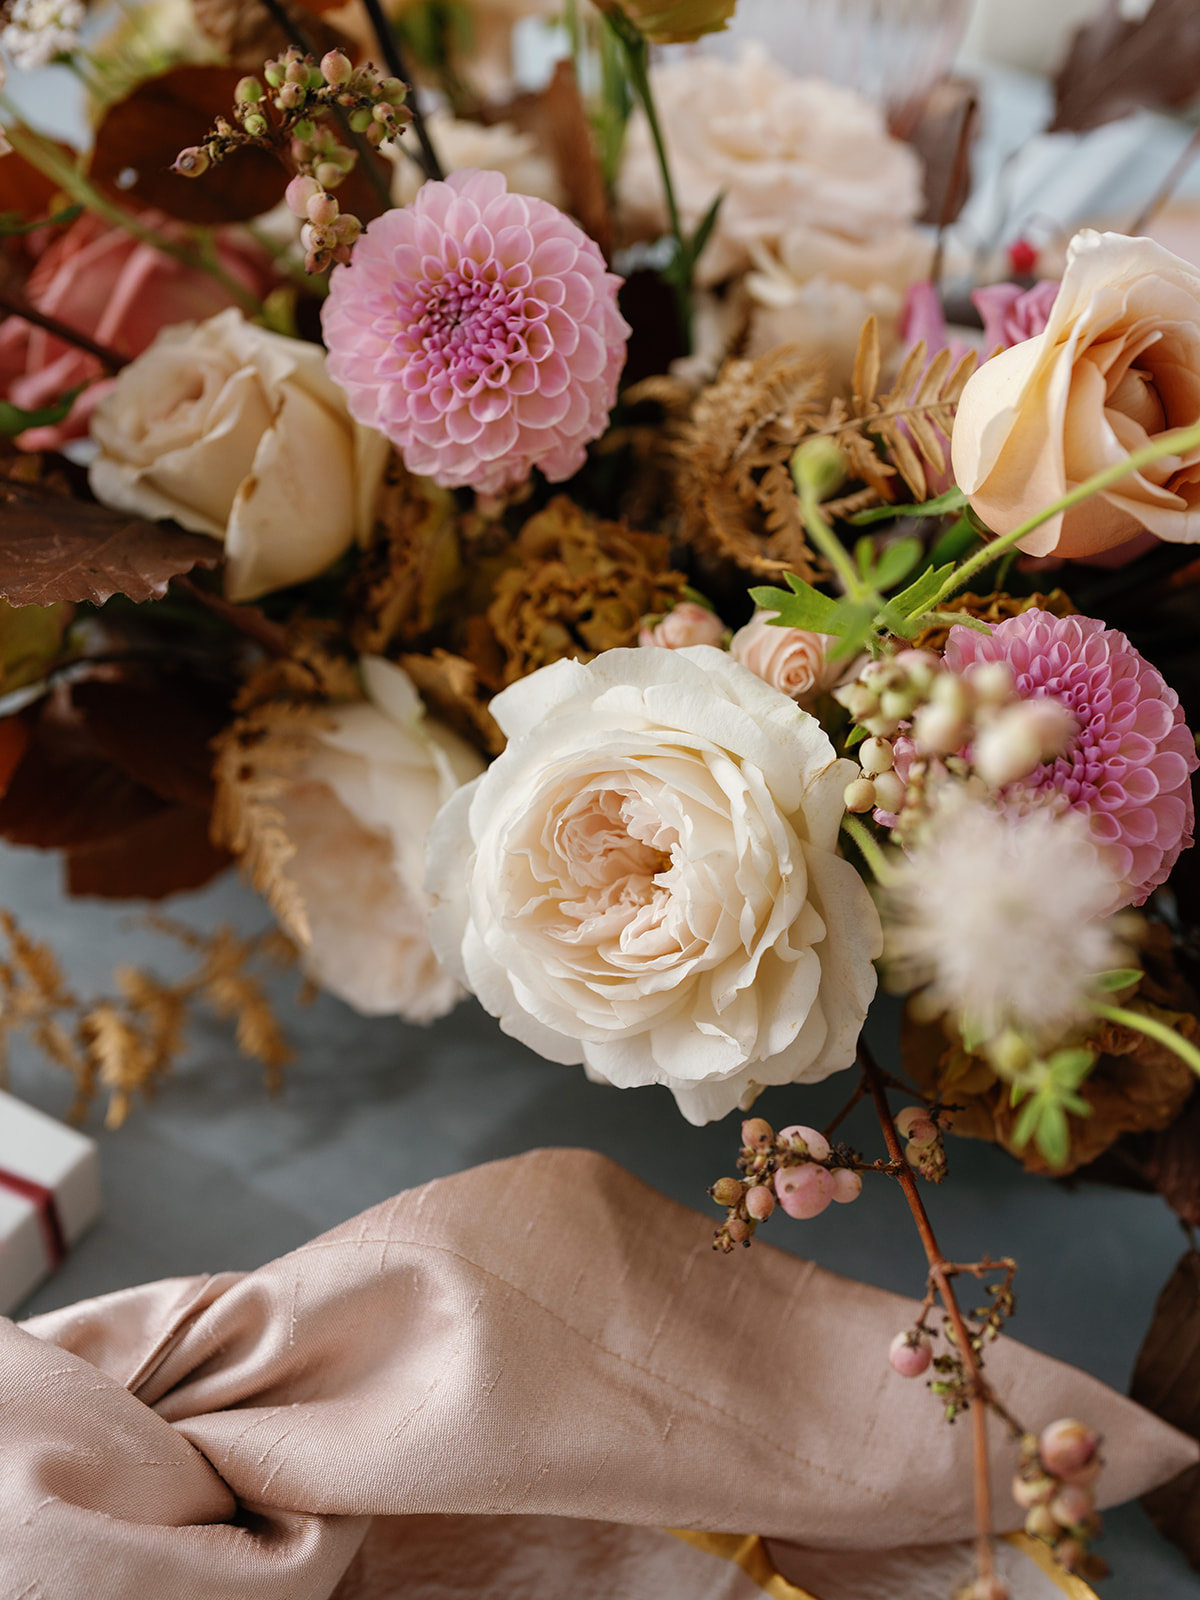 Florals for a sophisticated pink wedding.